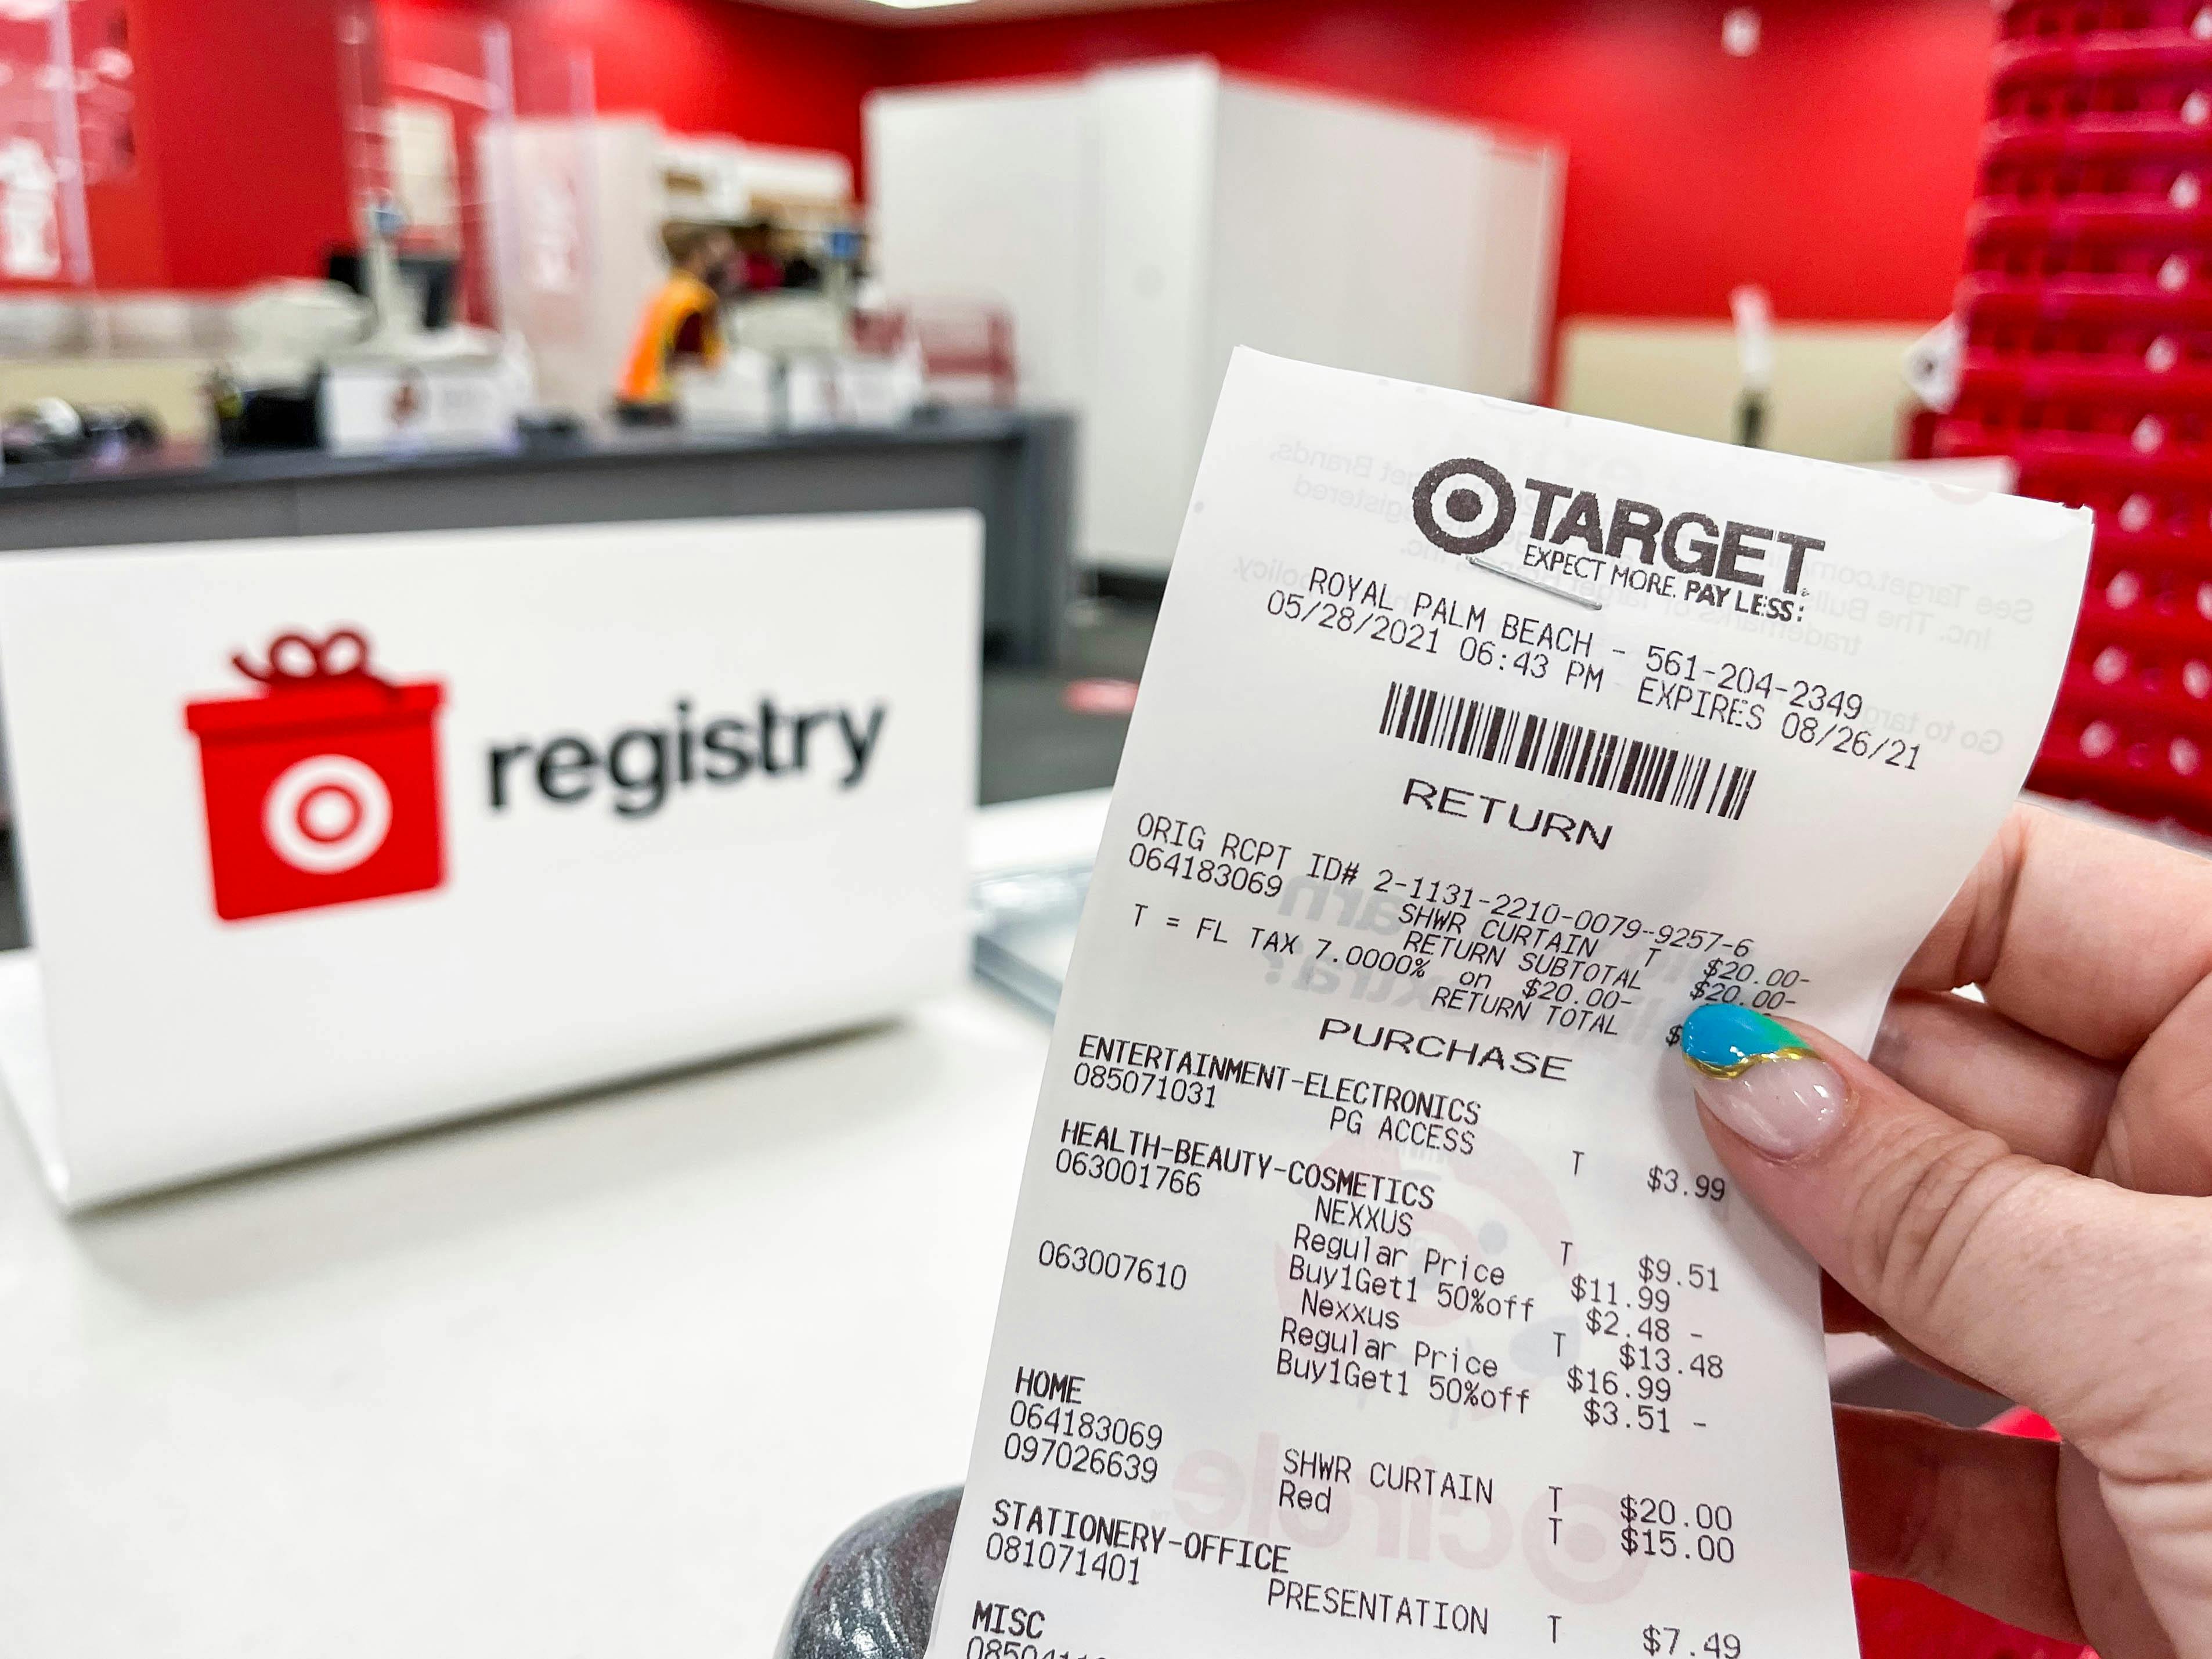 A person's hand holding up a return receipt in front of the Target registry counter.